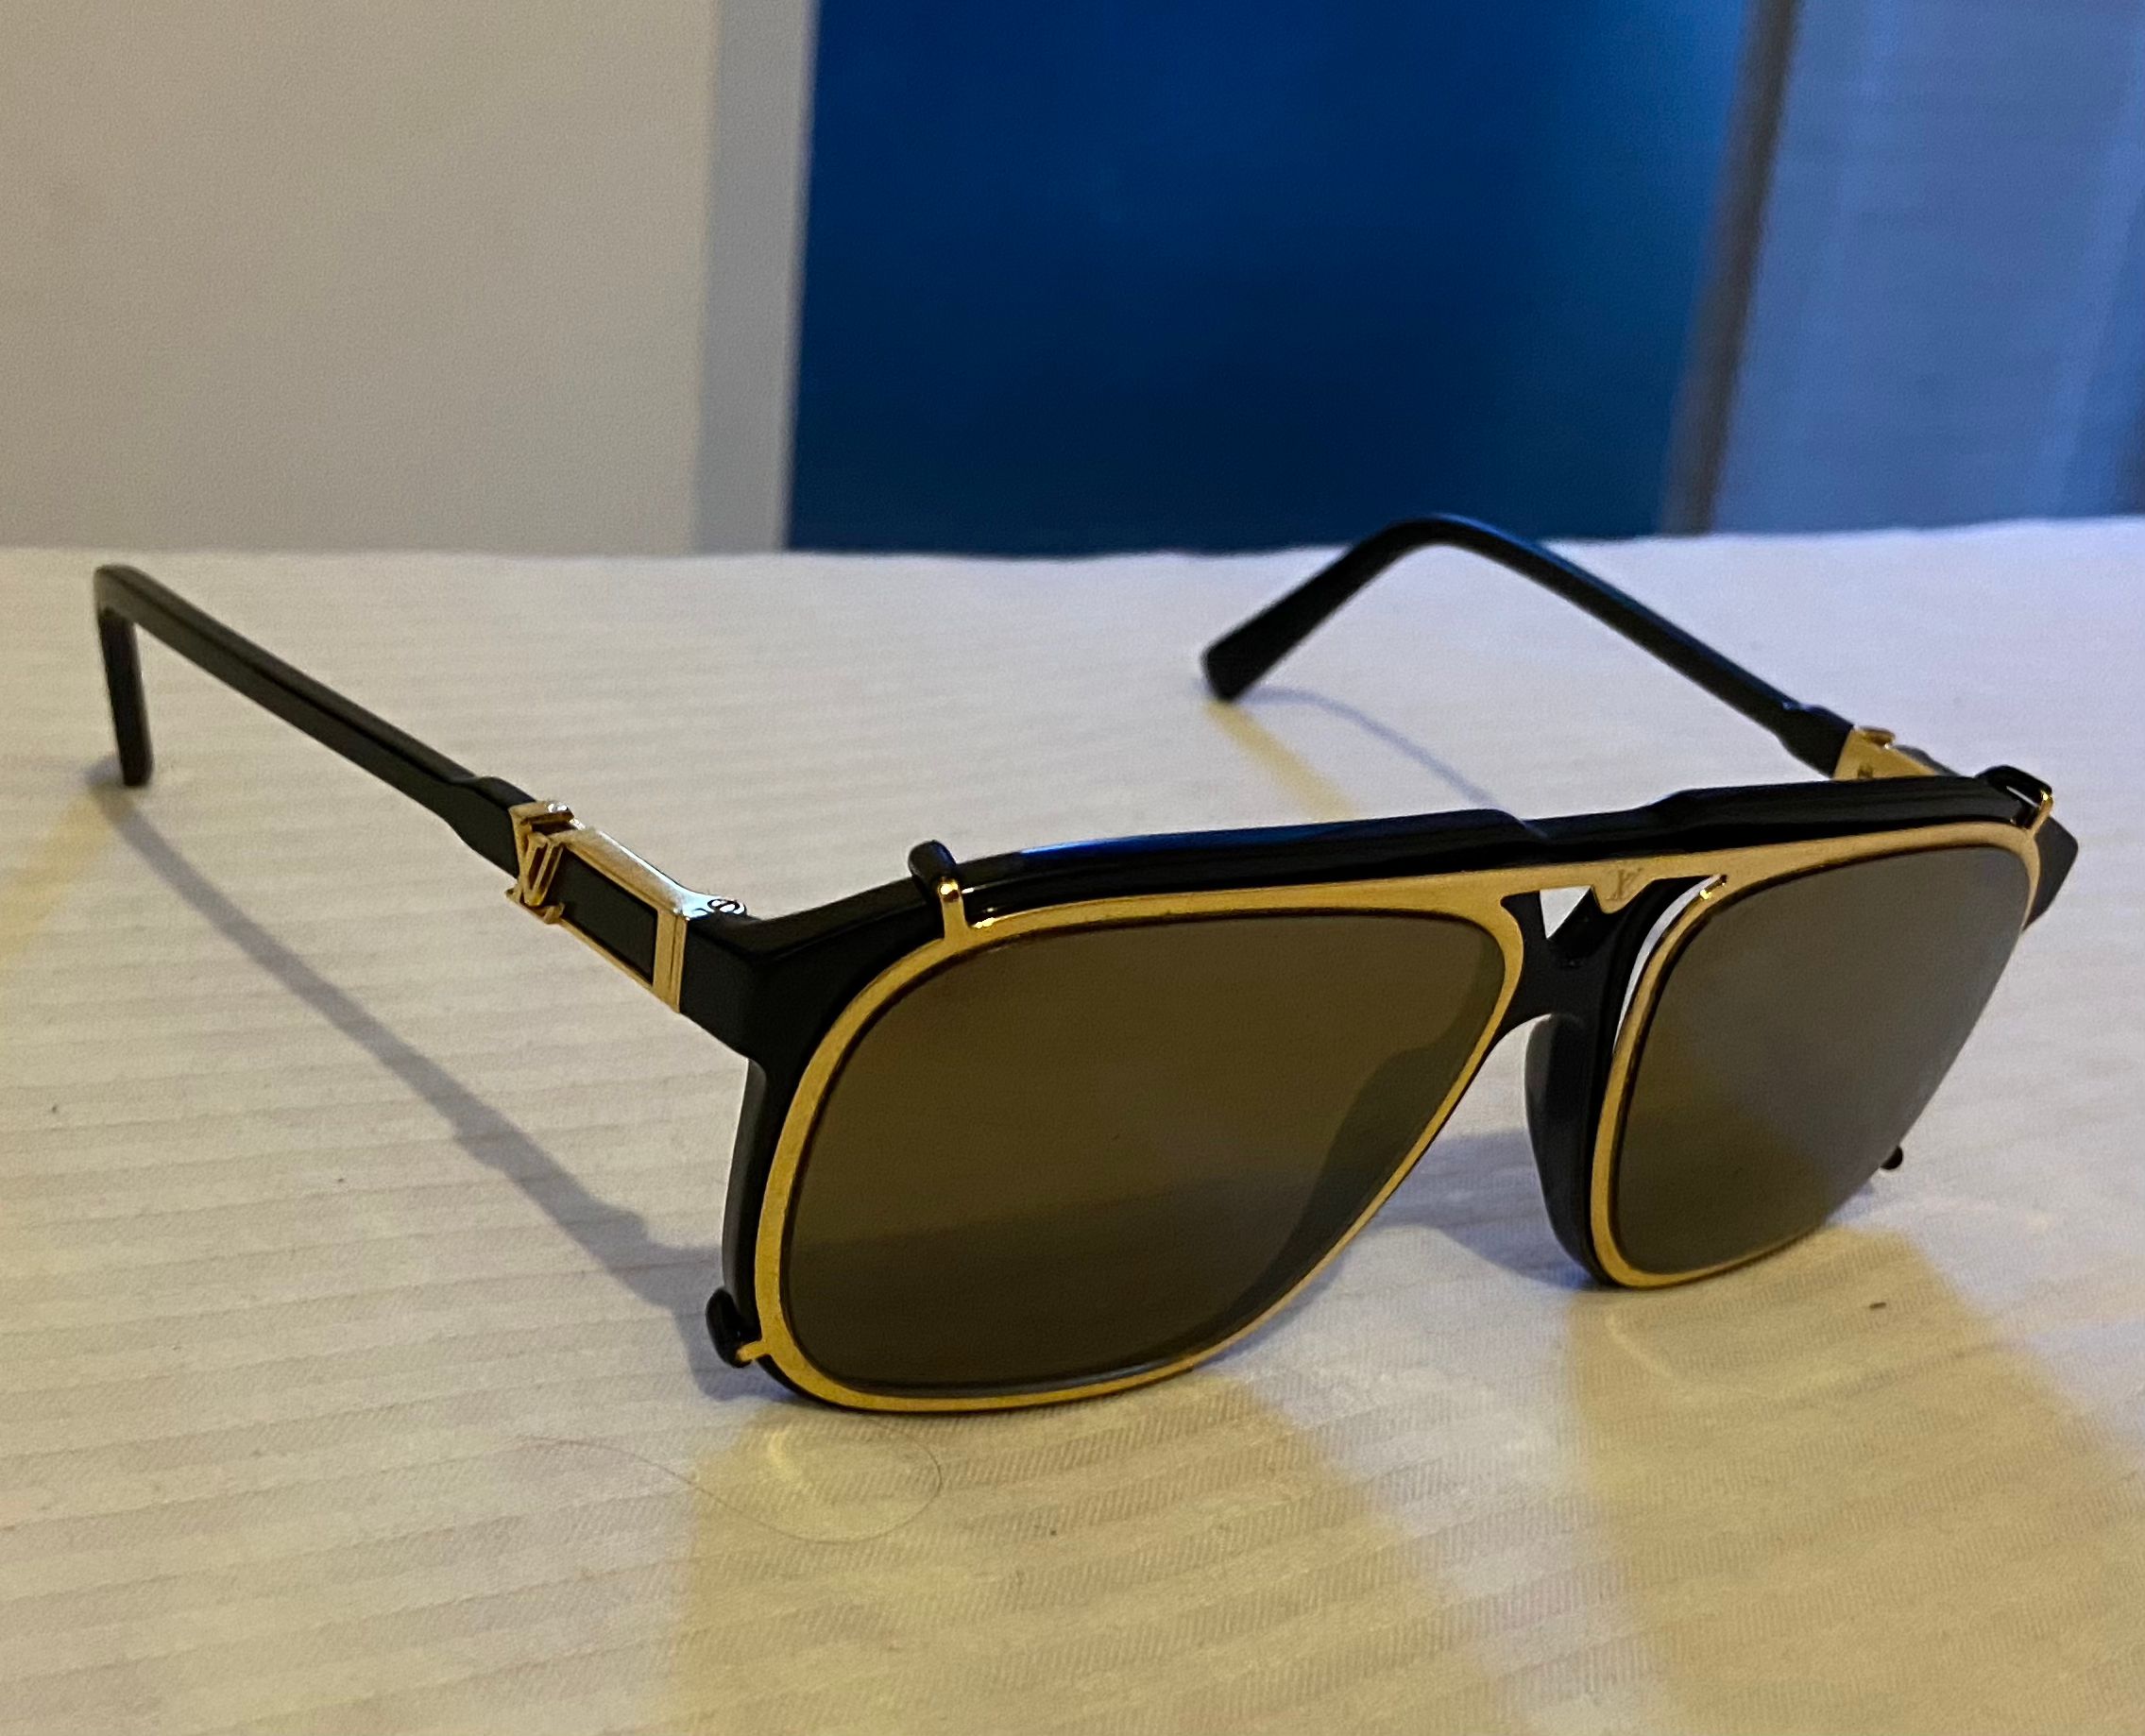 Compare prices for LV Satellite Sunglasses (Z1085W) in official stores